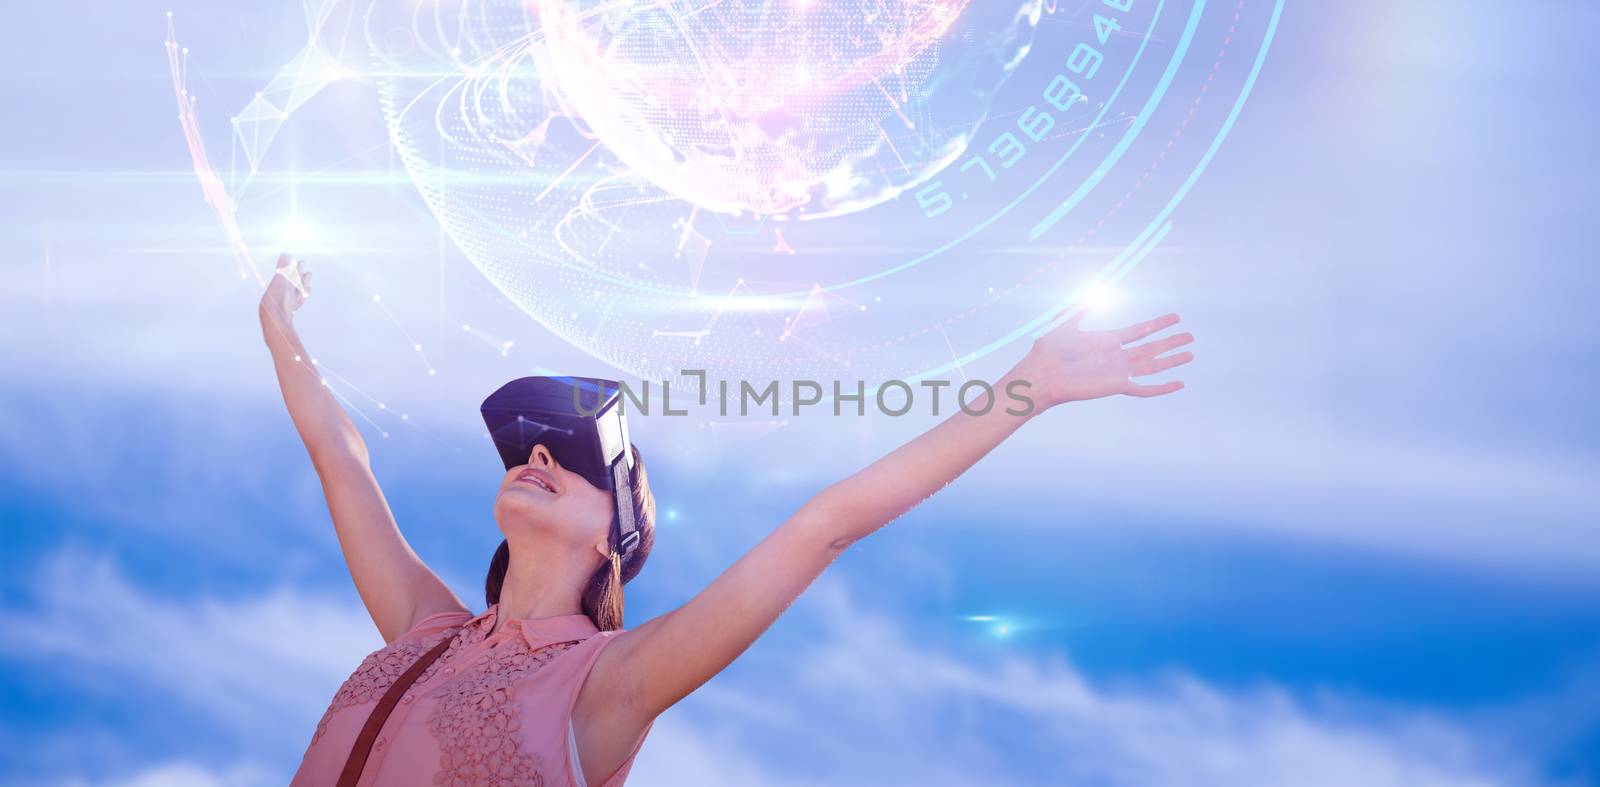 Composite image of woman with arms raised looking through virtual reality simulator against white ba by Wavebreakmedia